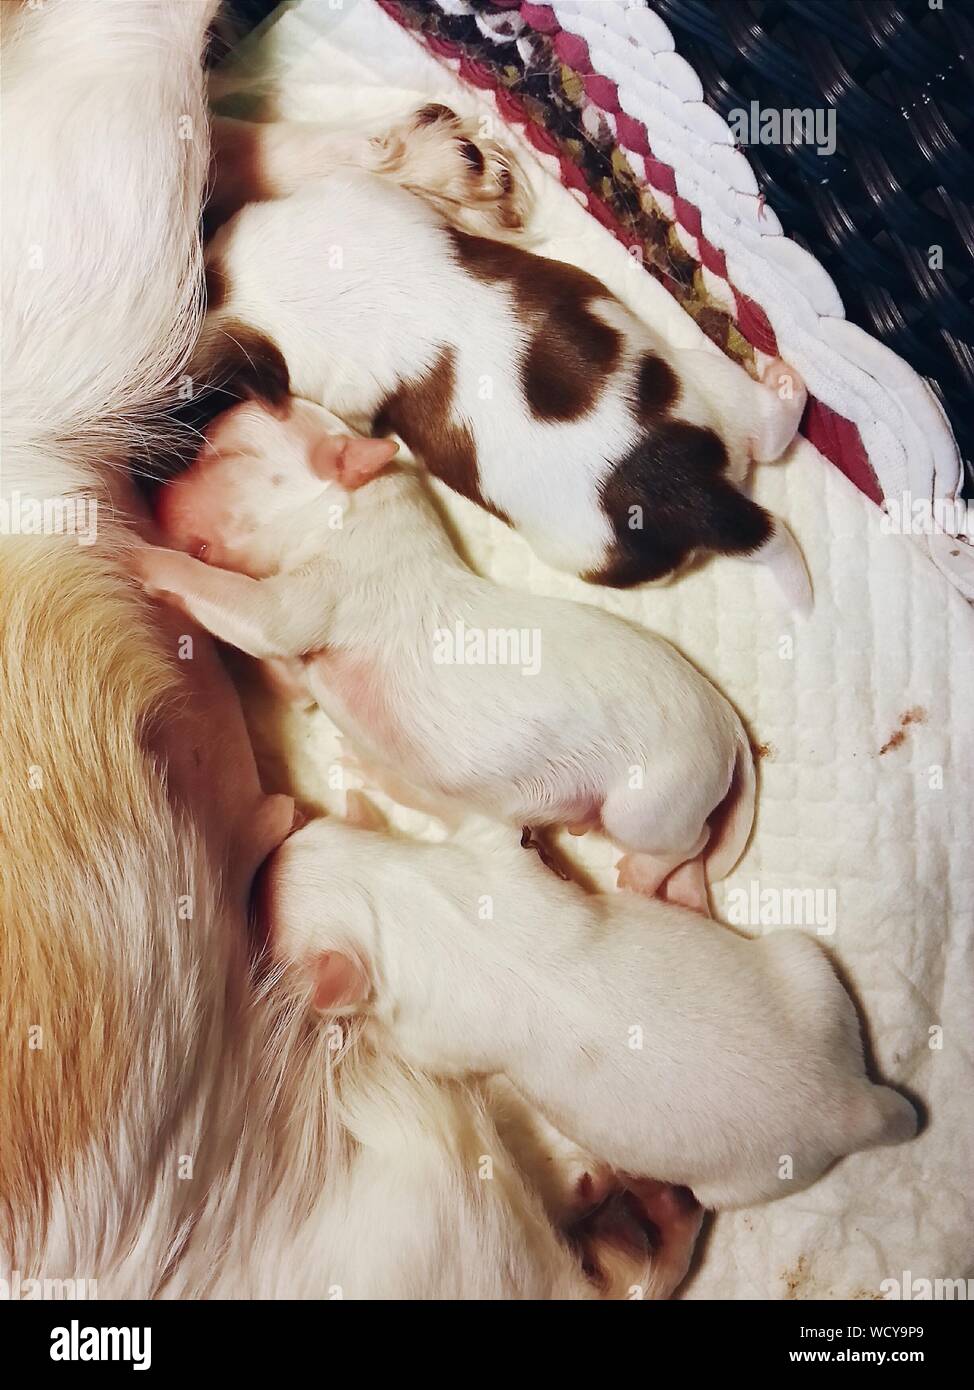 Midsection Of Female Dog Feeding Puppies On Pet Bed Stock Photo